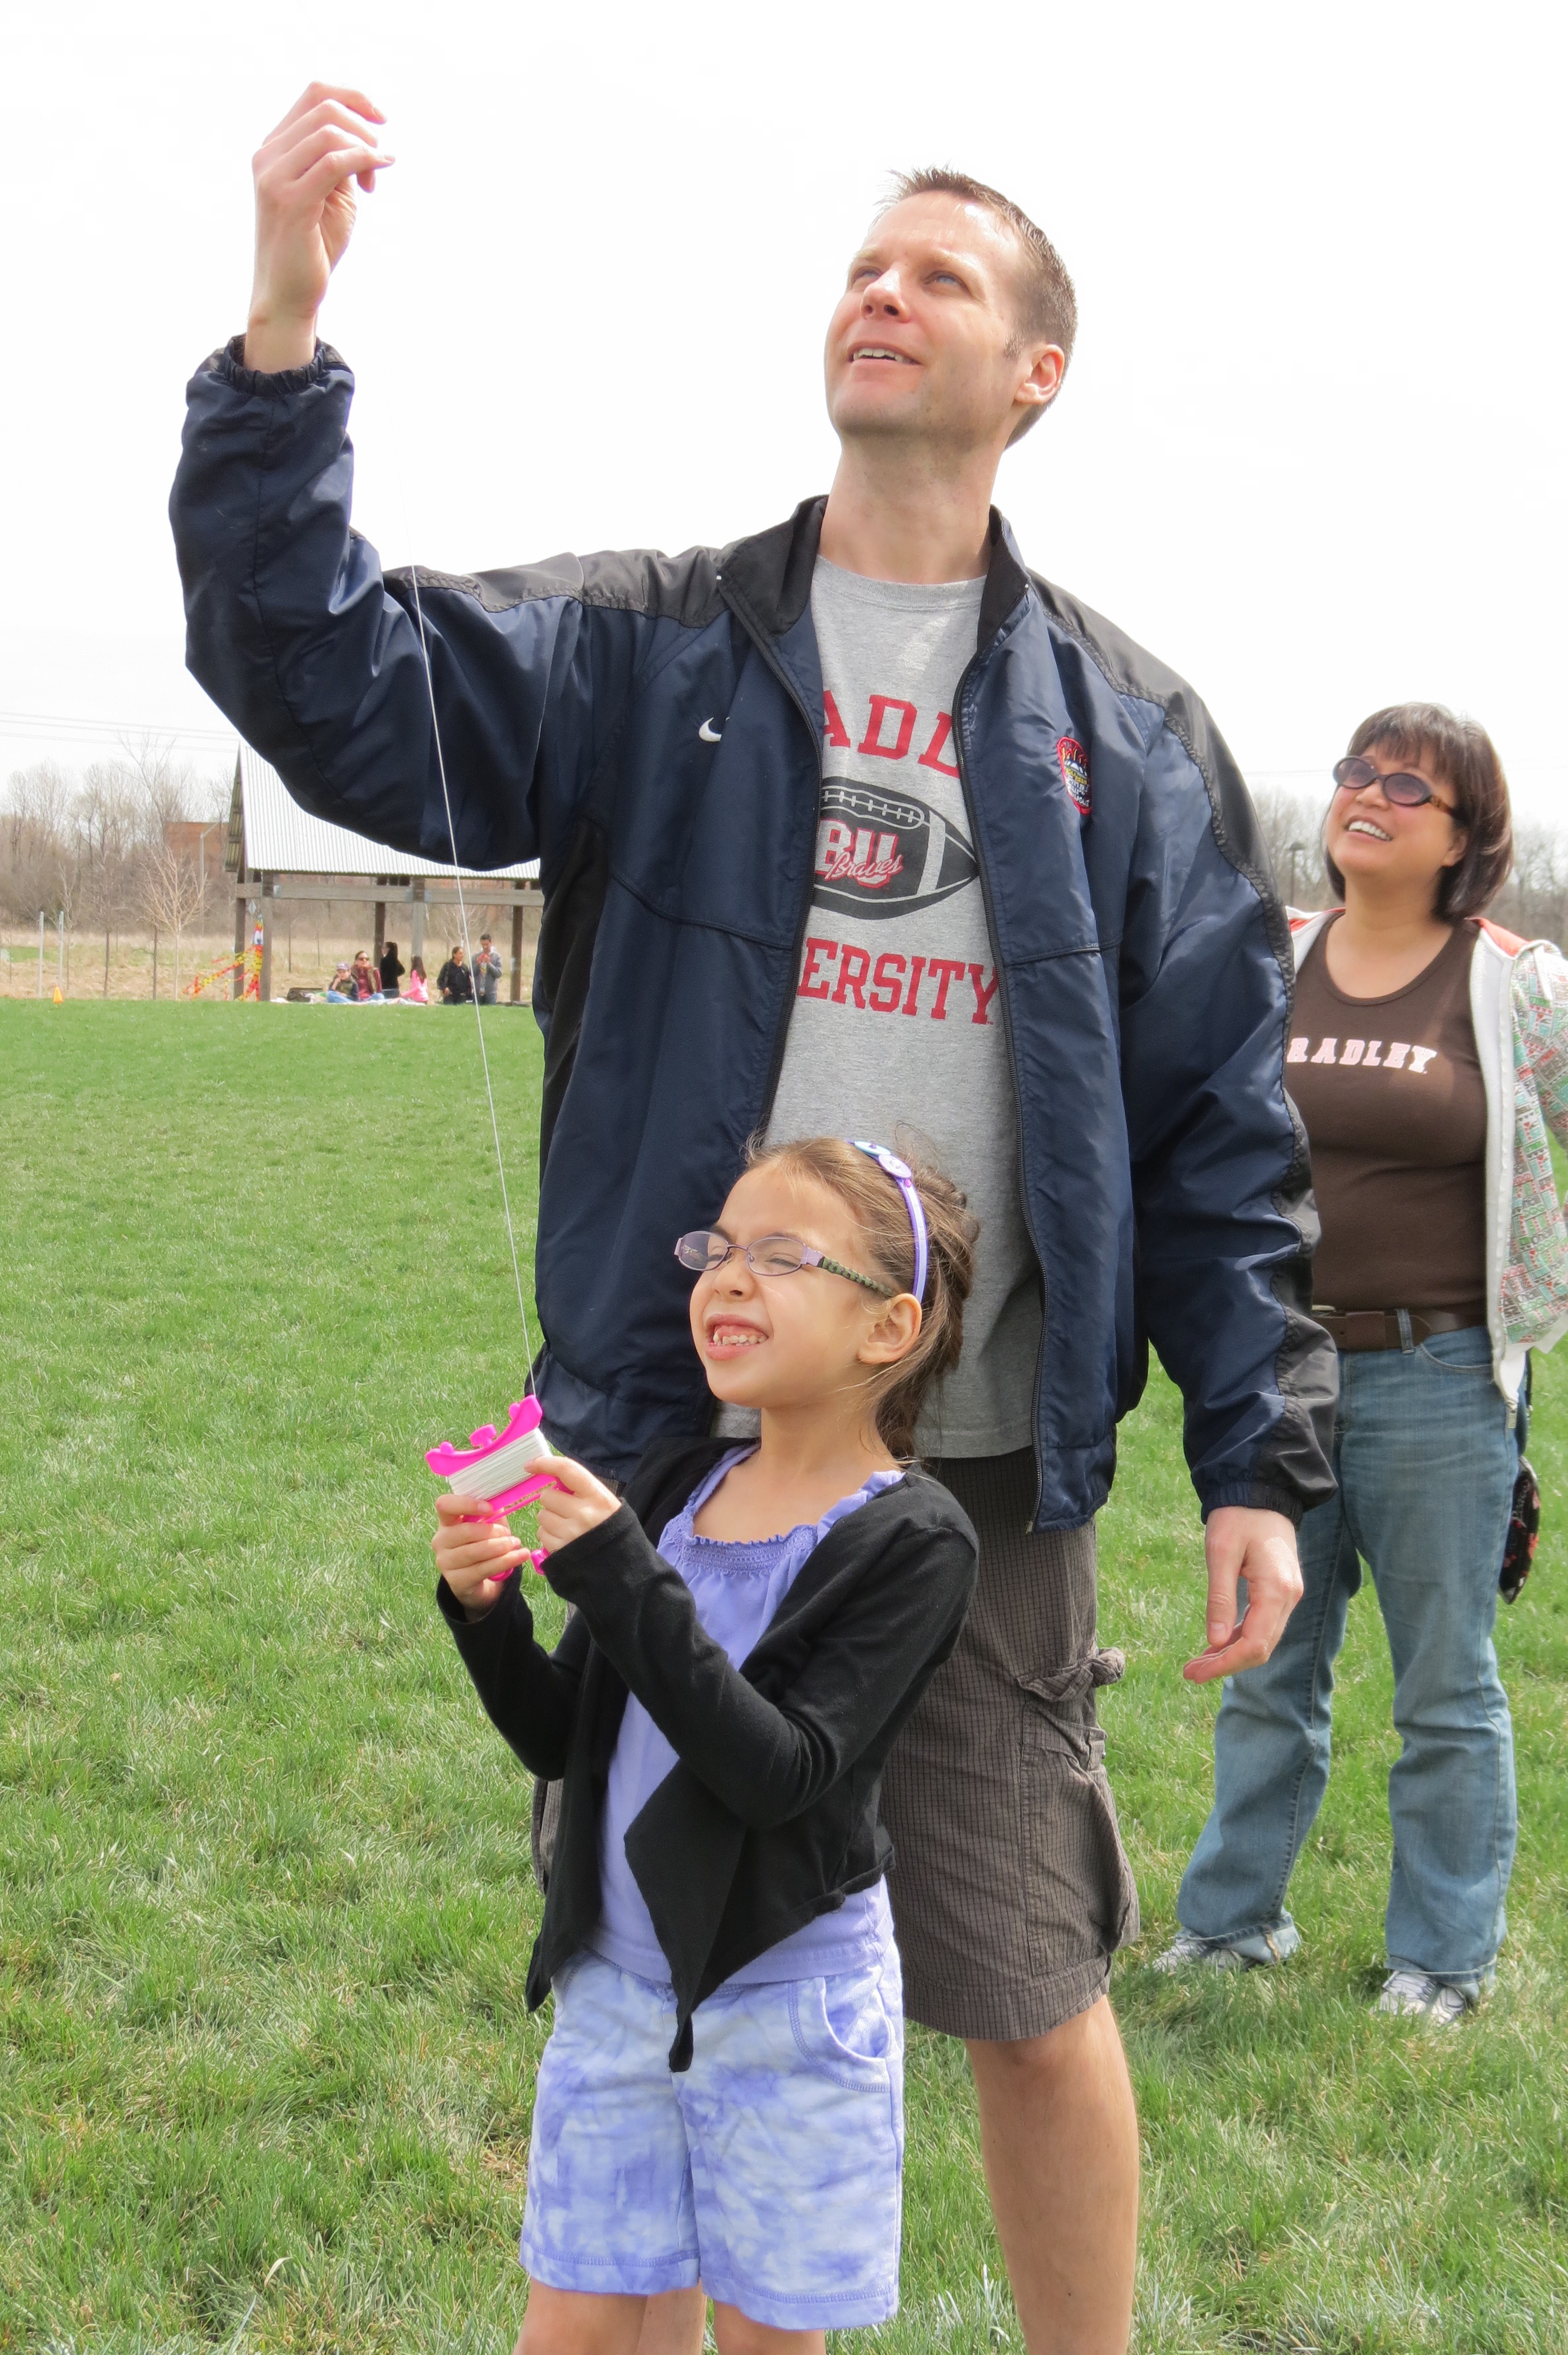 Young boys and girls do their best at flying kites during last year’s Kite Day in Mulberry Fields. This year the event will take place from 12 to 3 p.m., April 27. (Photo courtesy of Black Dog Books)